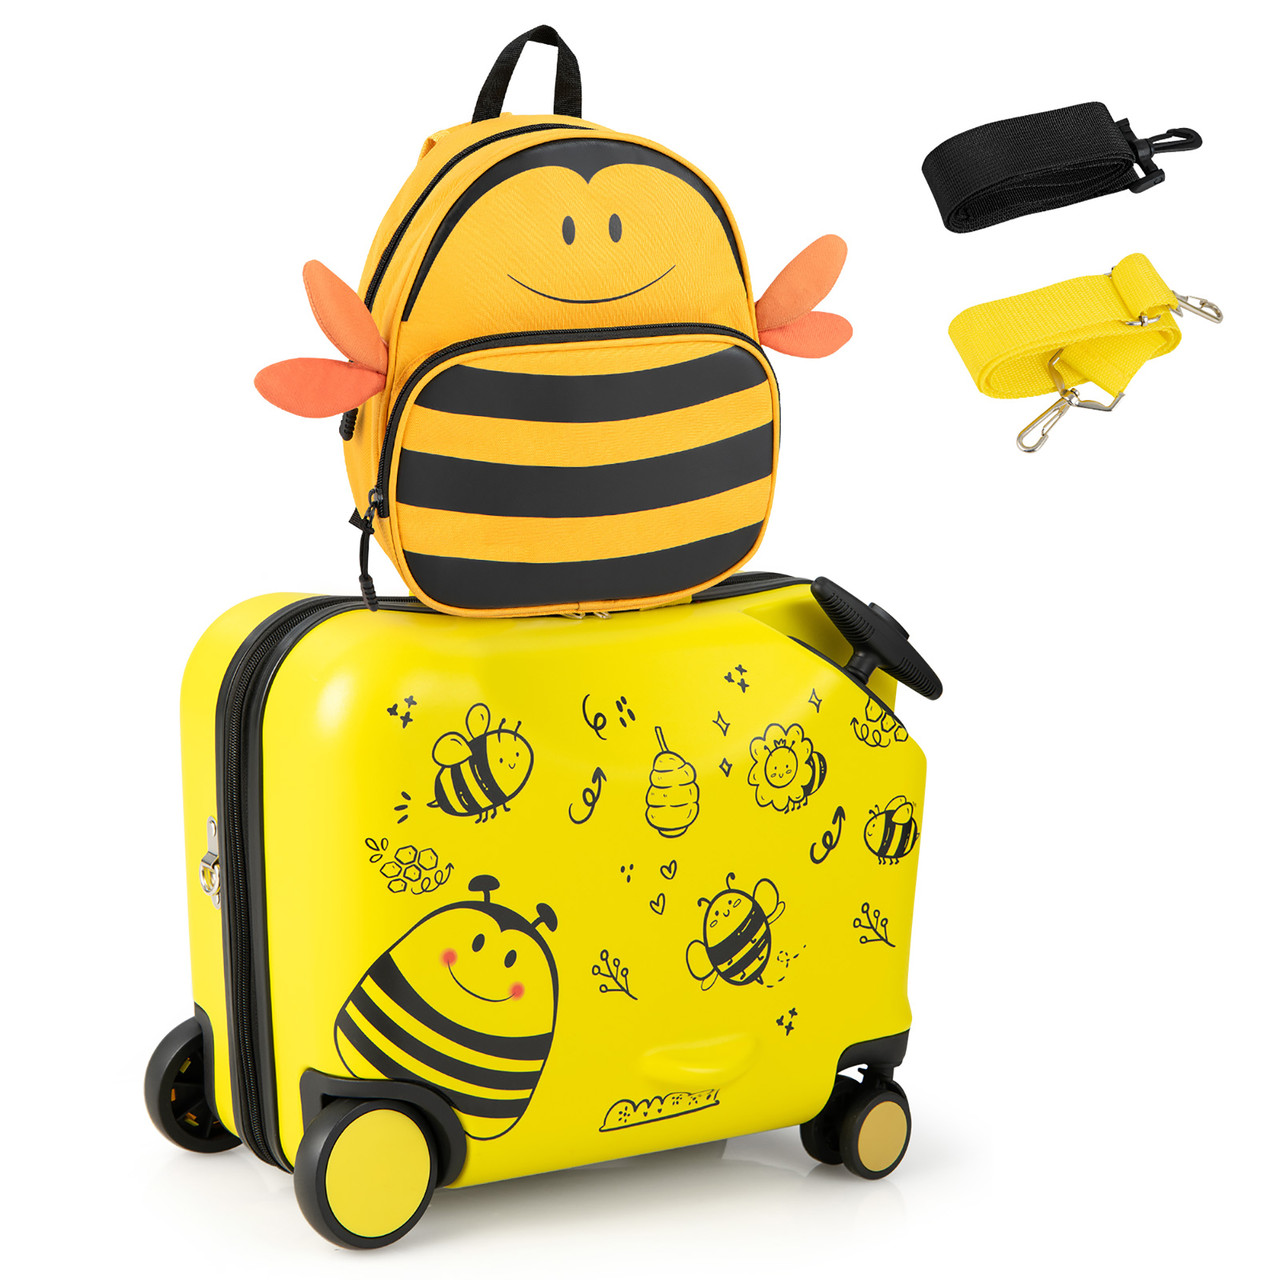 Kids' 2-Piece Ride-on Luggage Set Carry-on Suitcase & Backpack product image